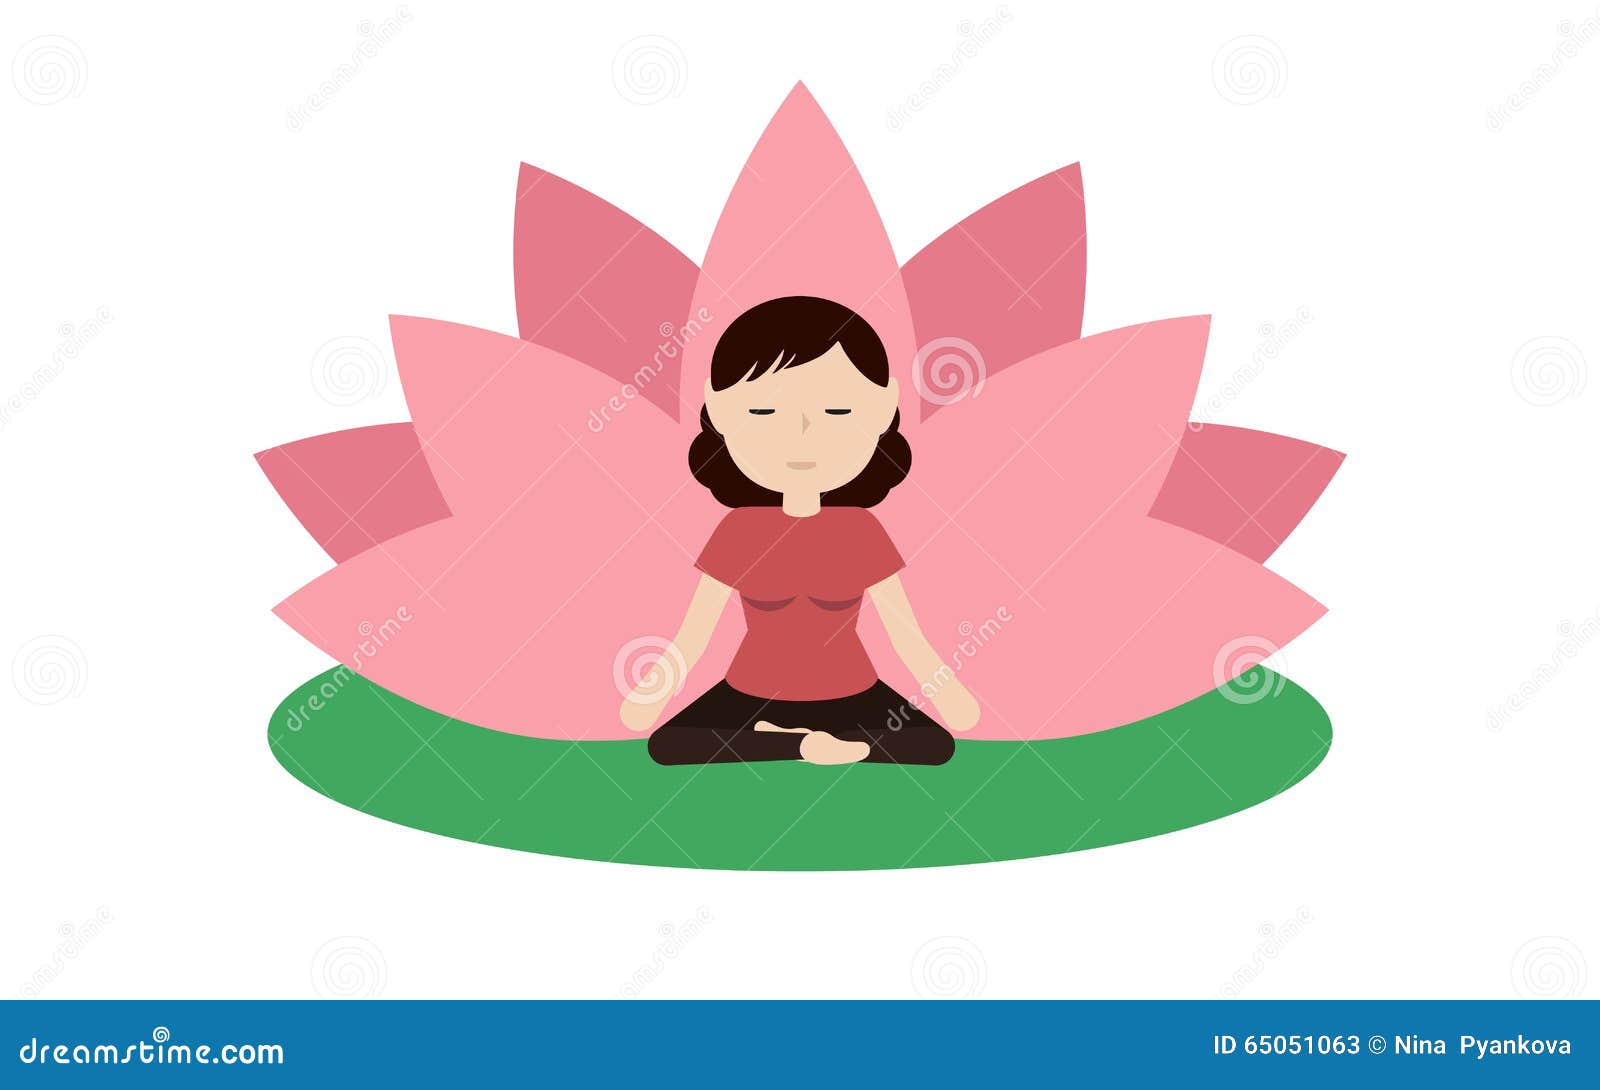 cristina monte recommends the lotus blossom position pic